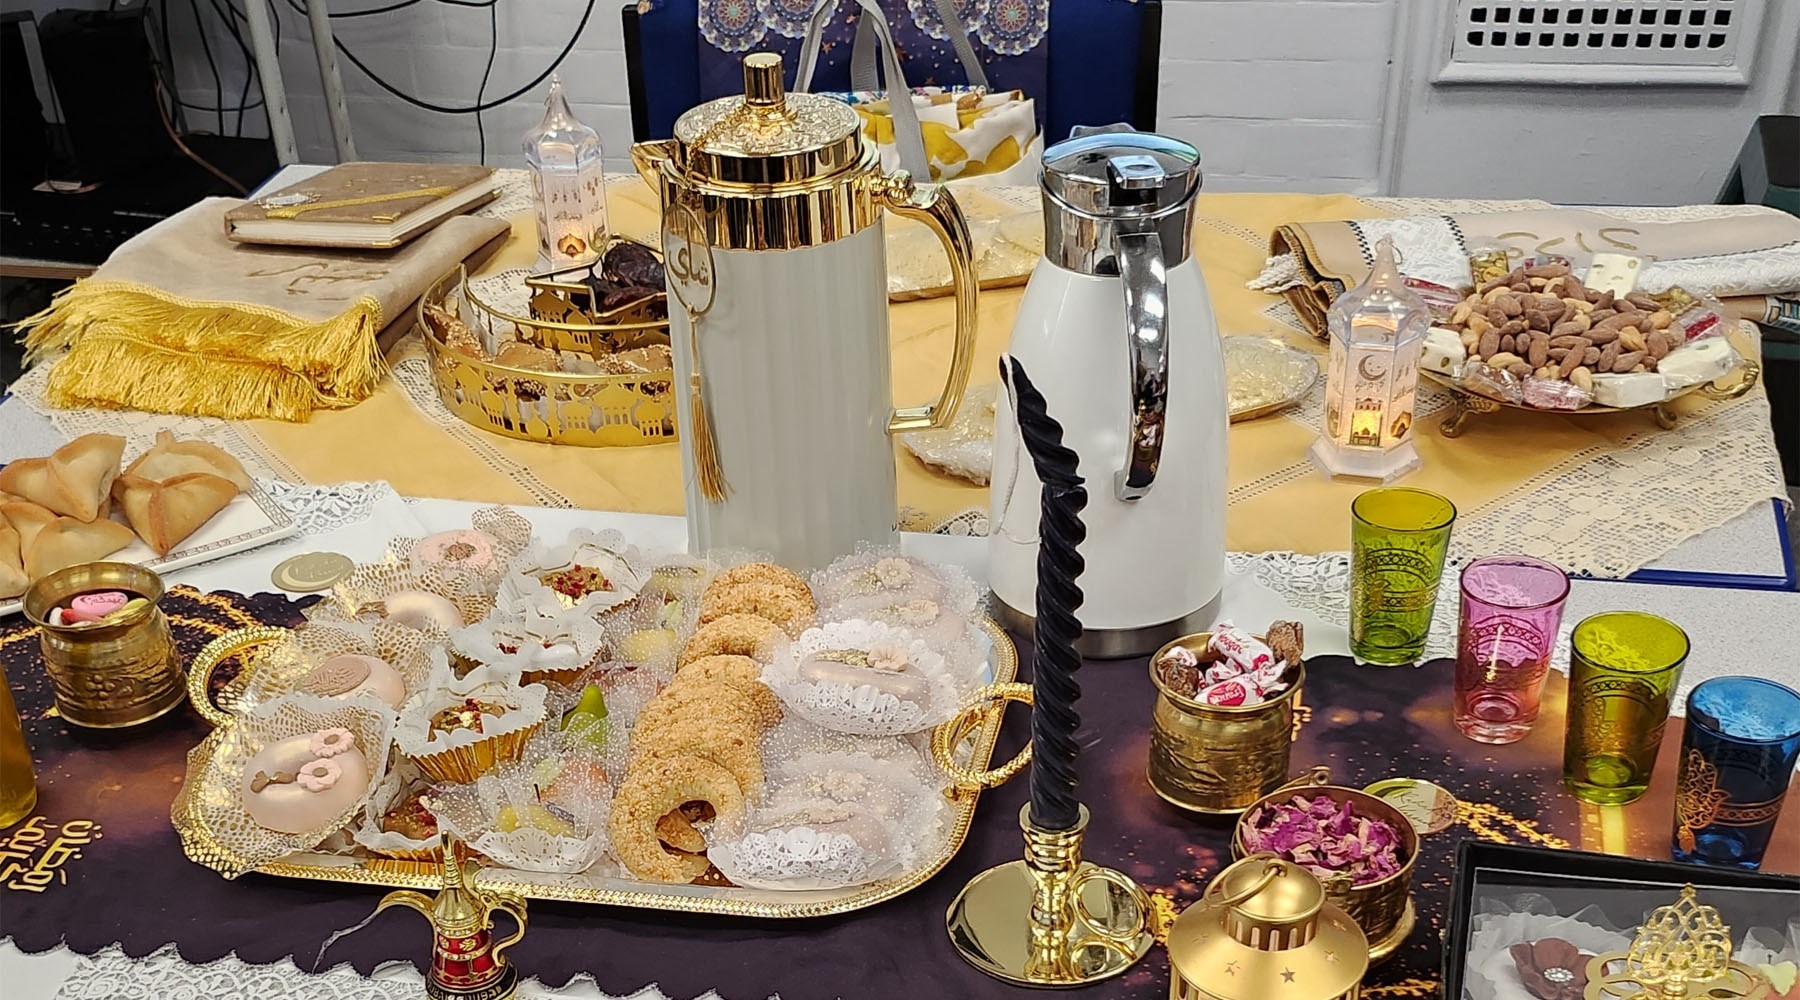 A table spread containing cultural food, snacks and ornaments